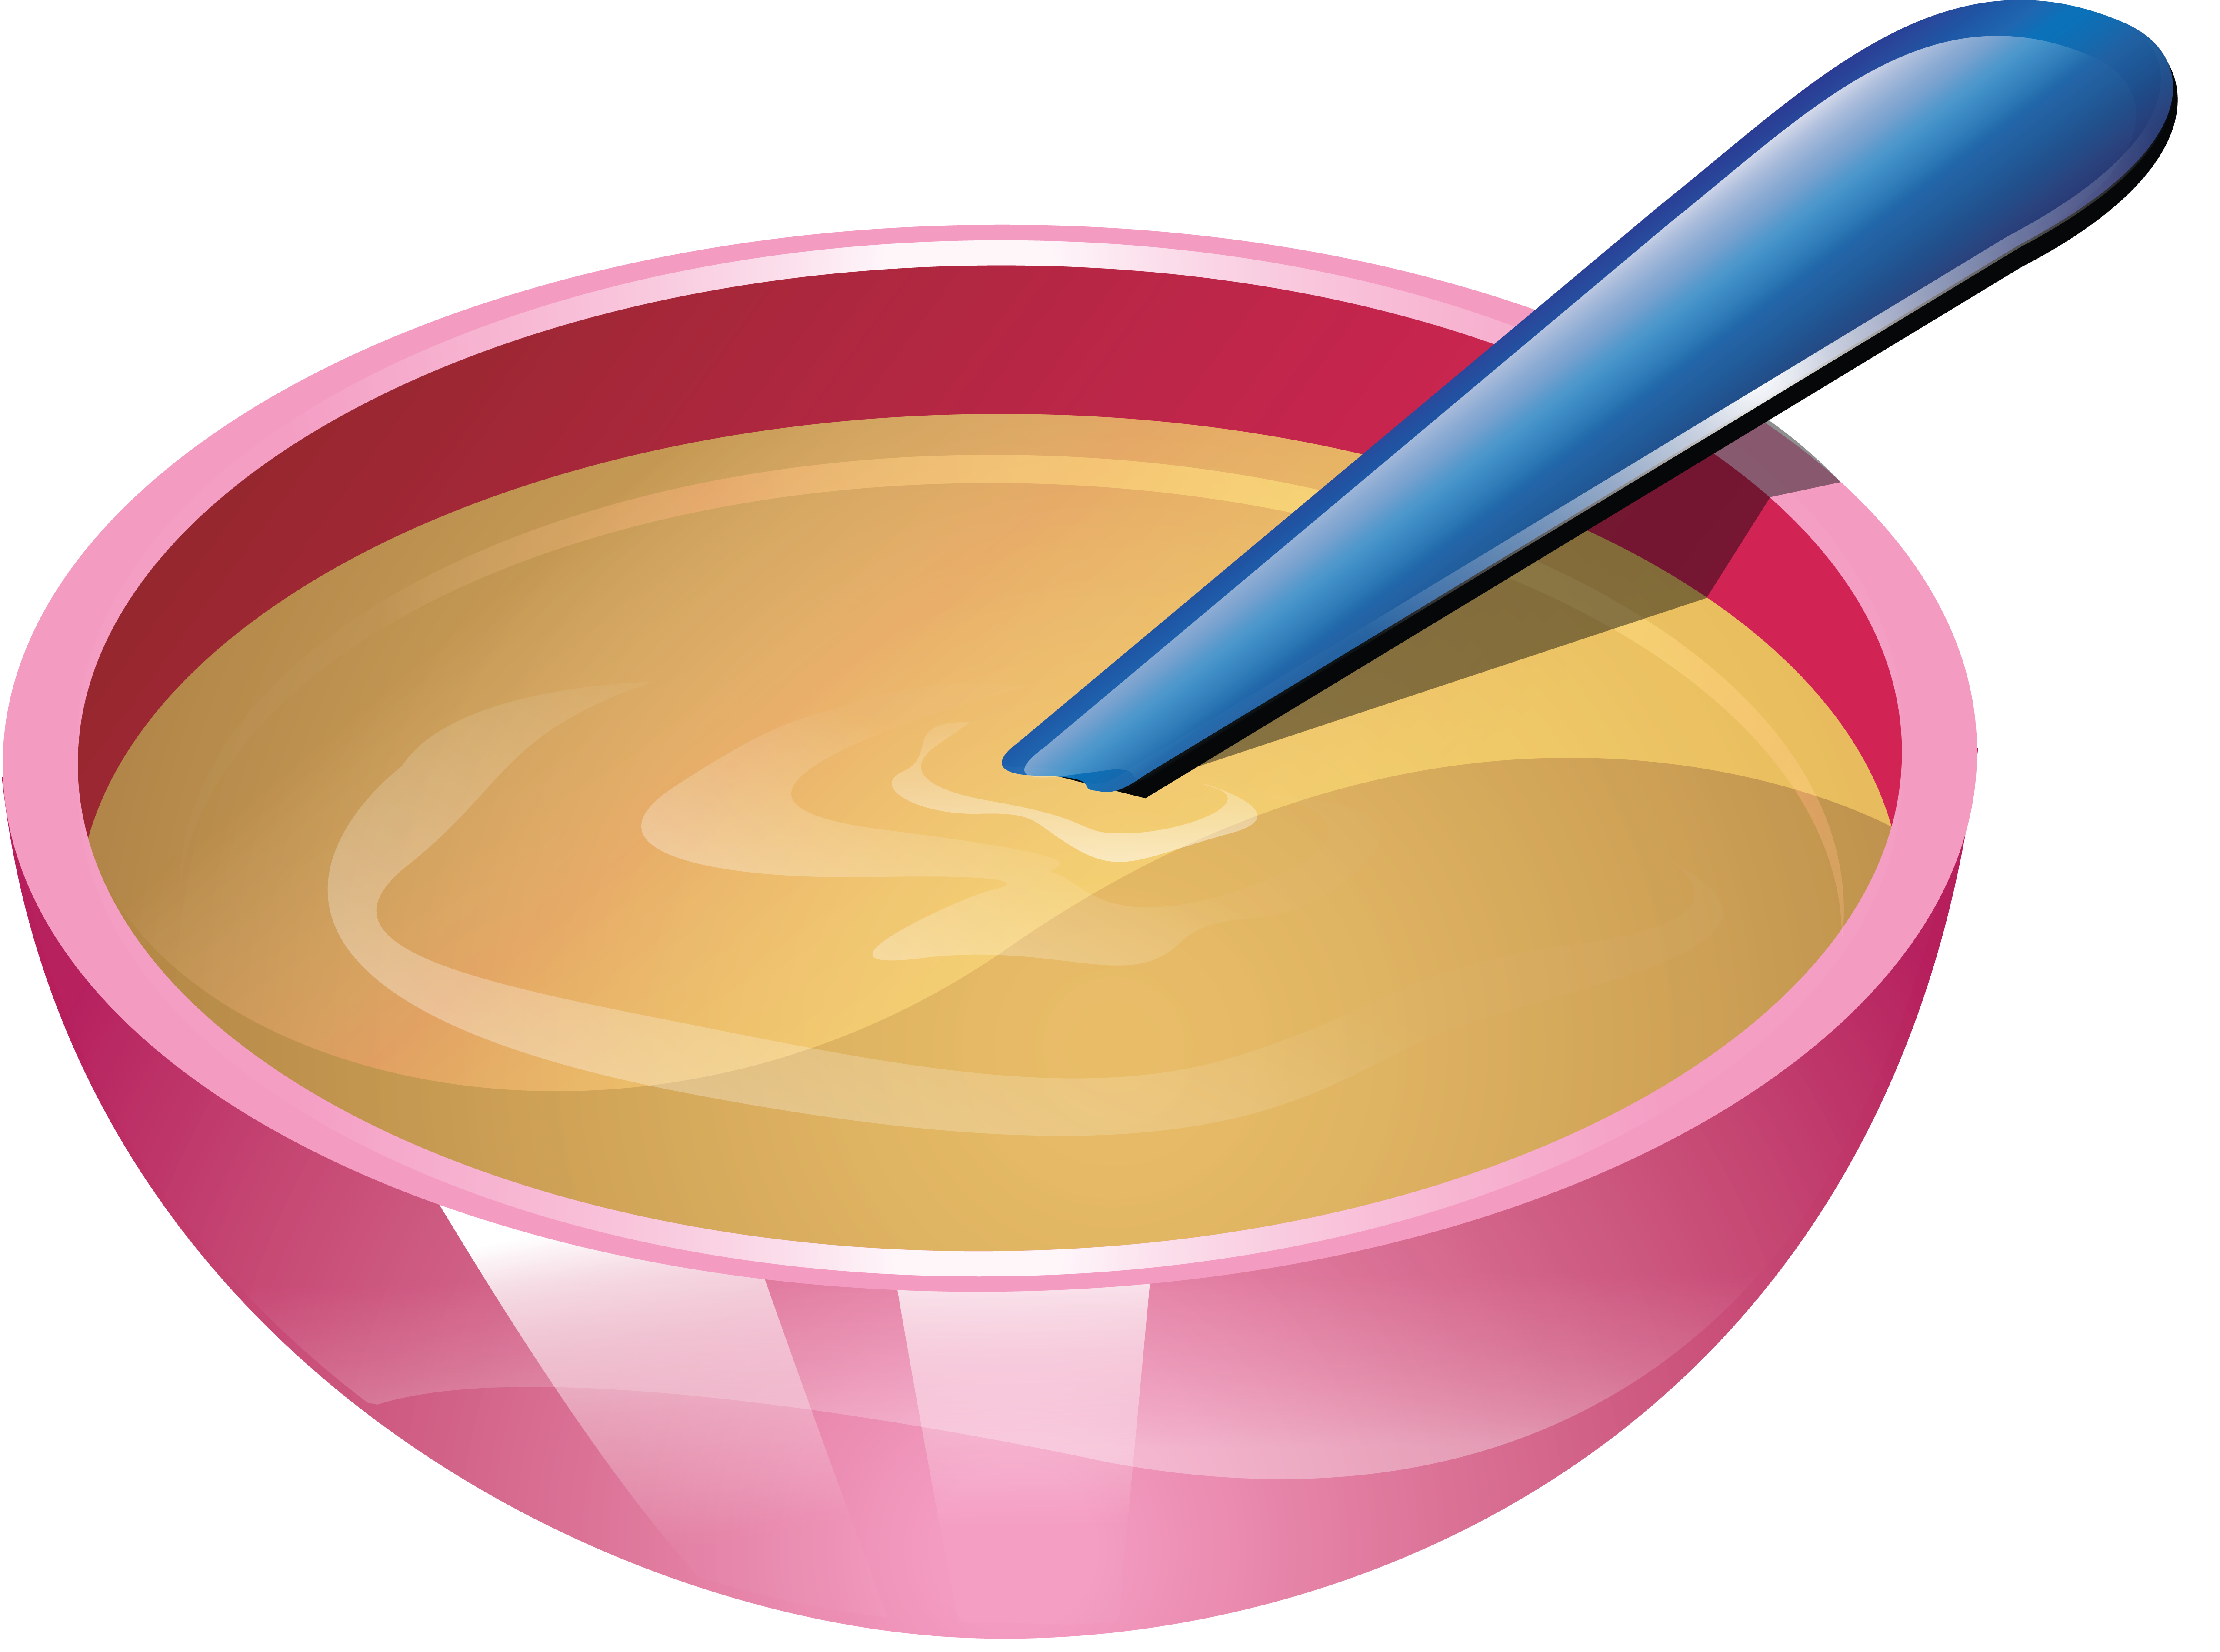 clipart soup in pink bowl